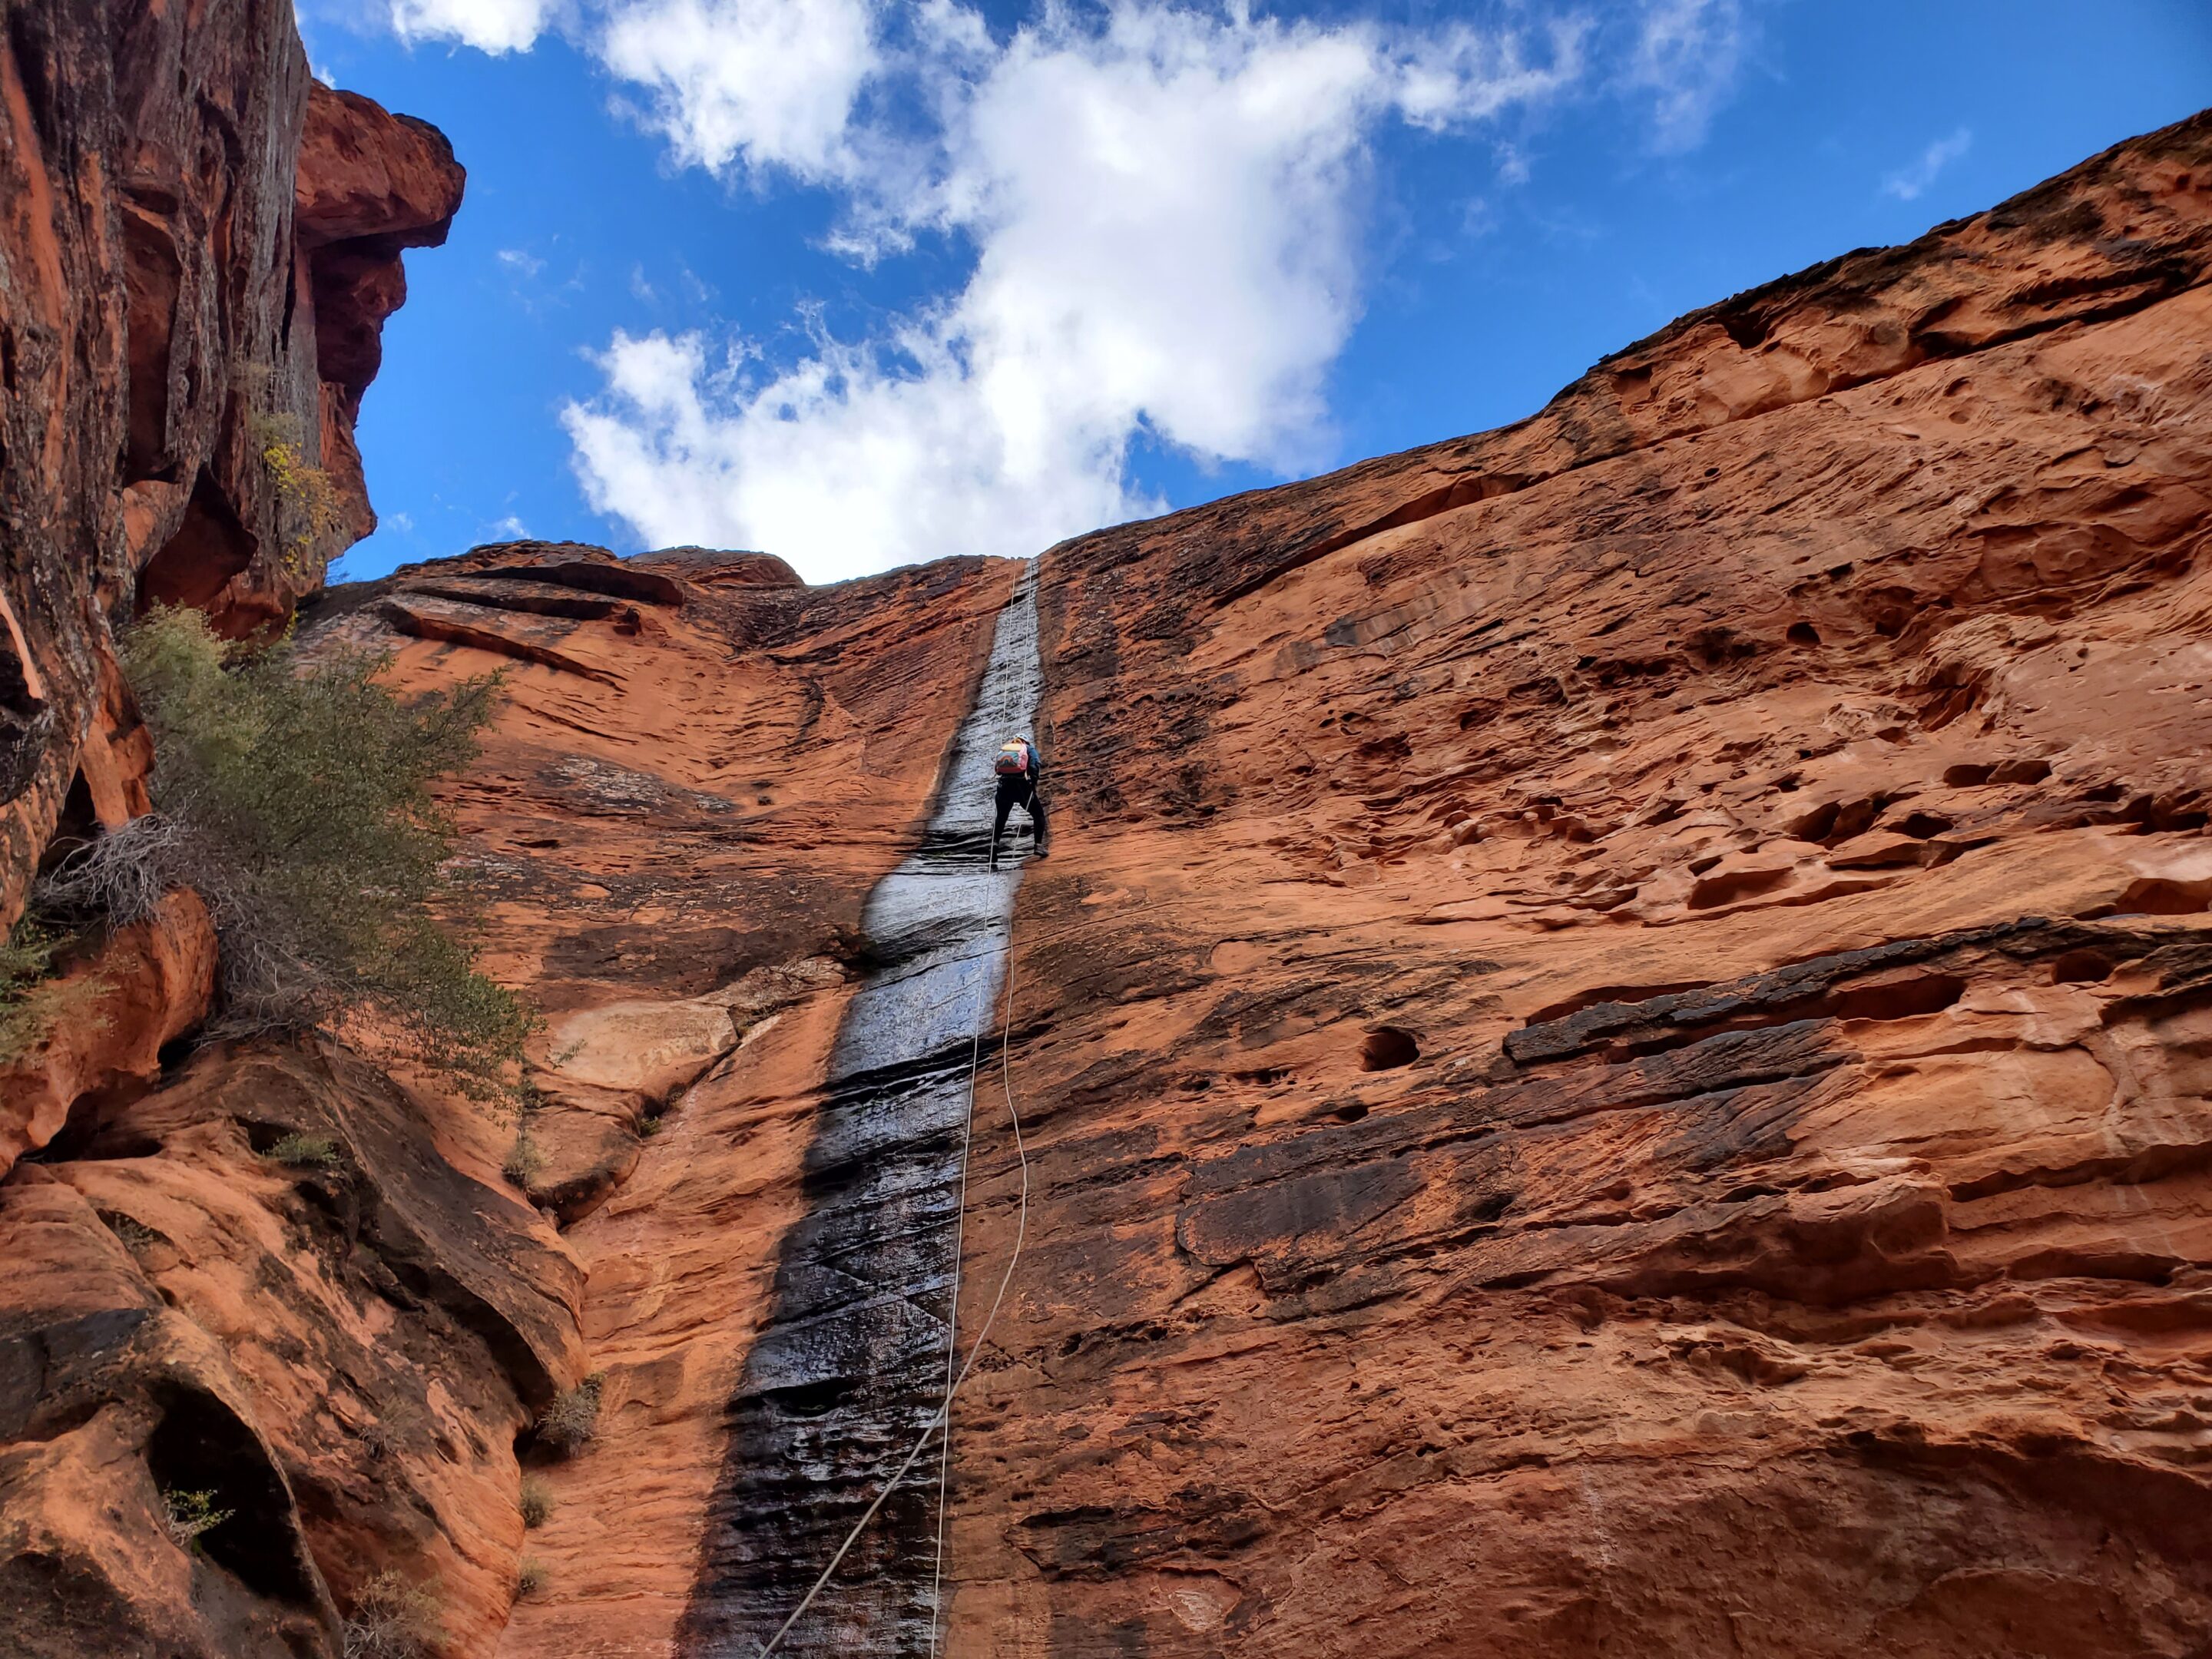 Rappelling in Snow Canyon at "Hidden Canyon"